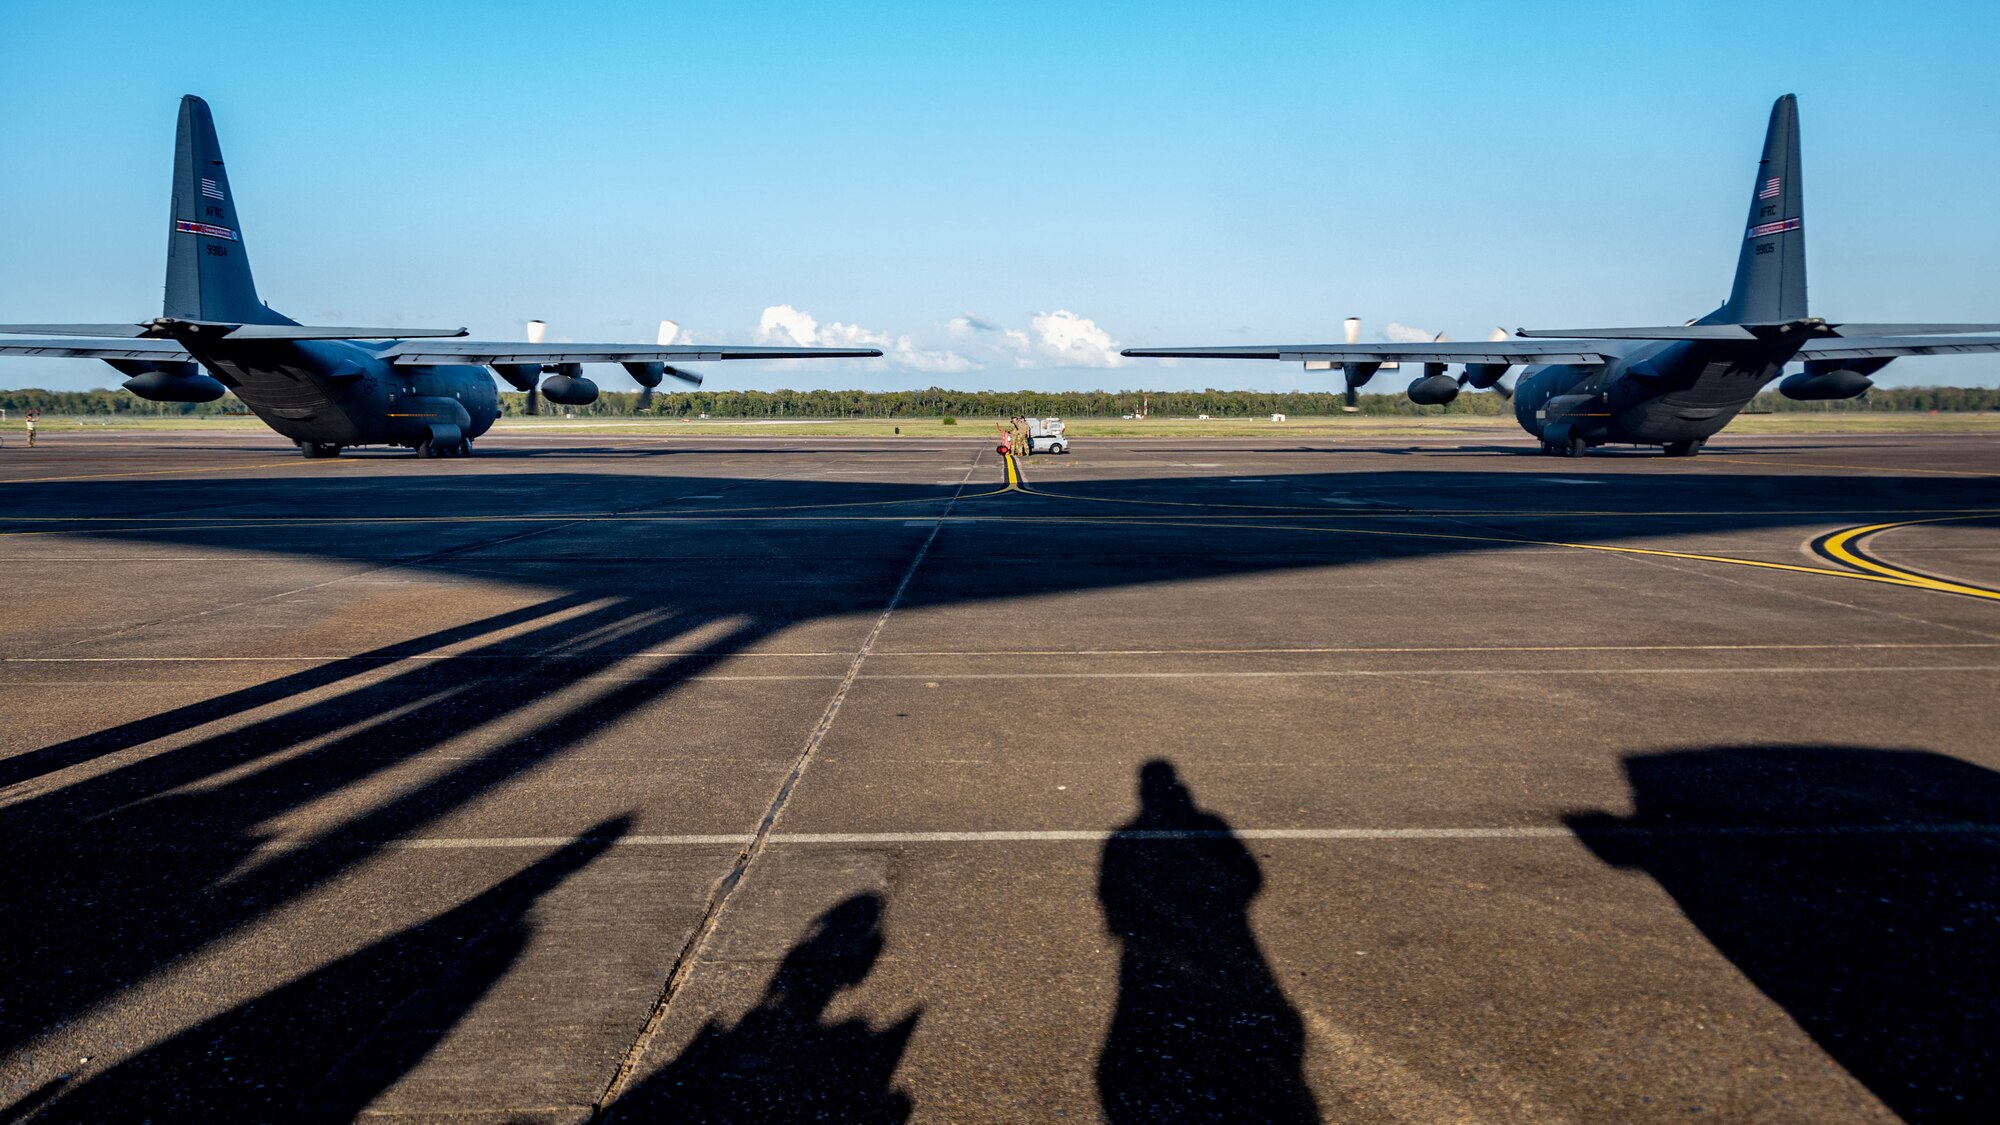 A pair of U.S. Air Force Reserve C-130H Hercules aircraft assigned to the 910th Airlift Wing, based at Youngstown Air Reserve Station, Ohio and equipped with a Modular Aerial Spray System, starts engines prior to taking off while ground support personnel look on at Barksdale Air Force Base, Louisiana, Oct. 22, 2020.